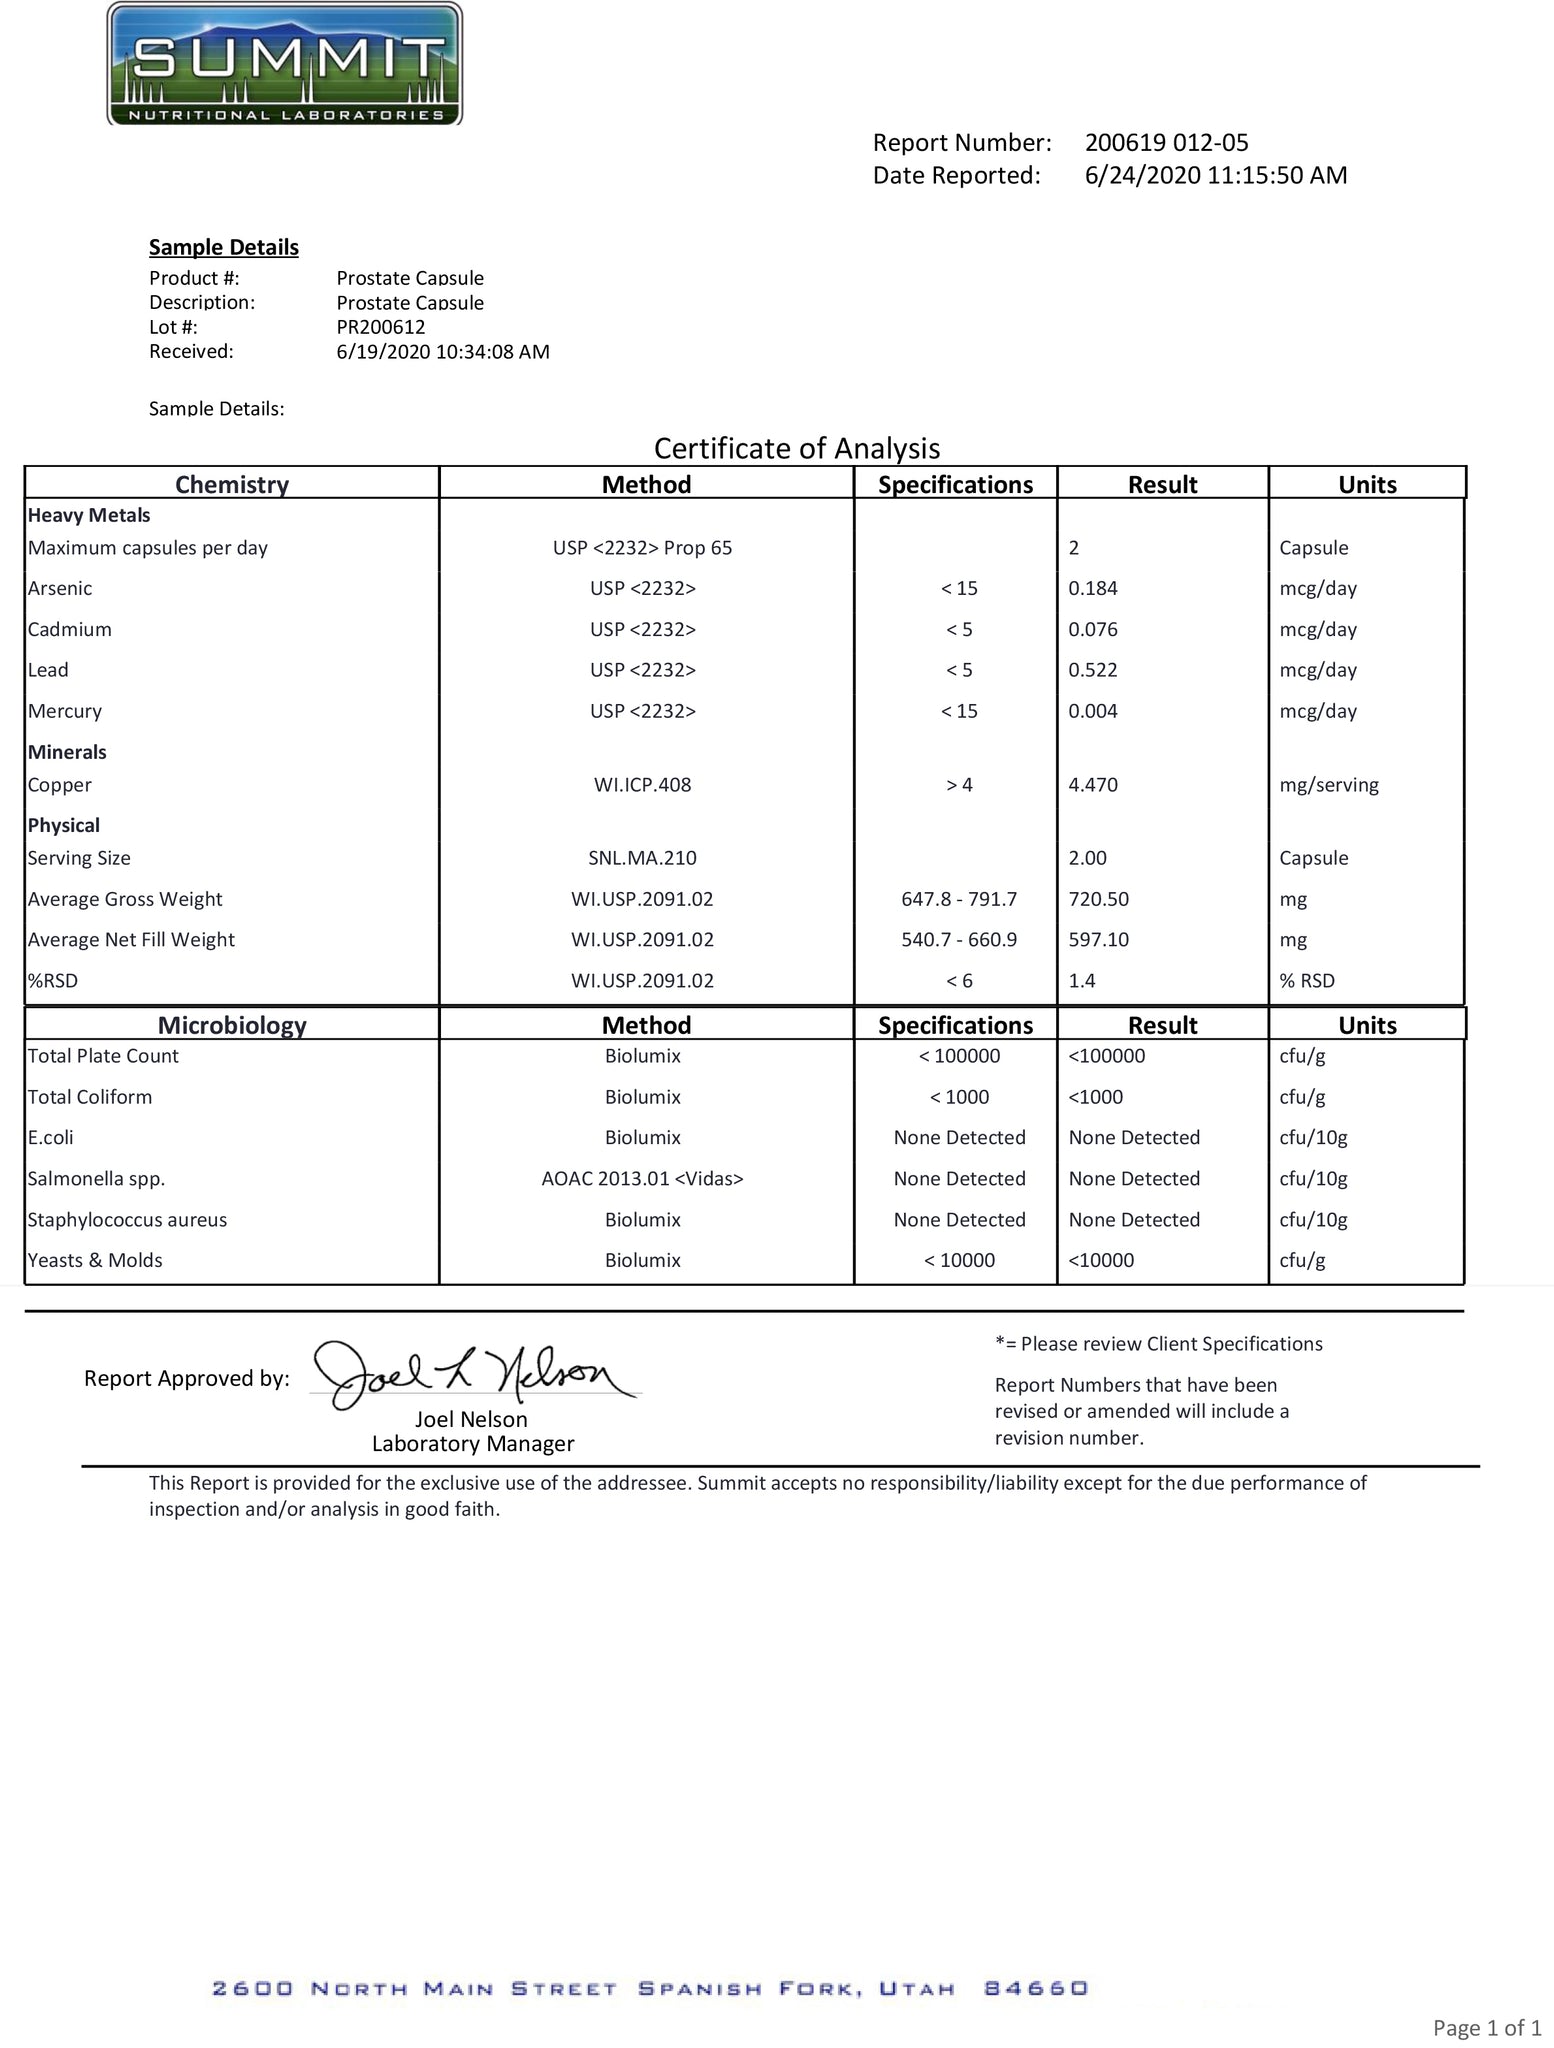 Lab Report for Prostate Supplement